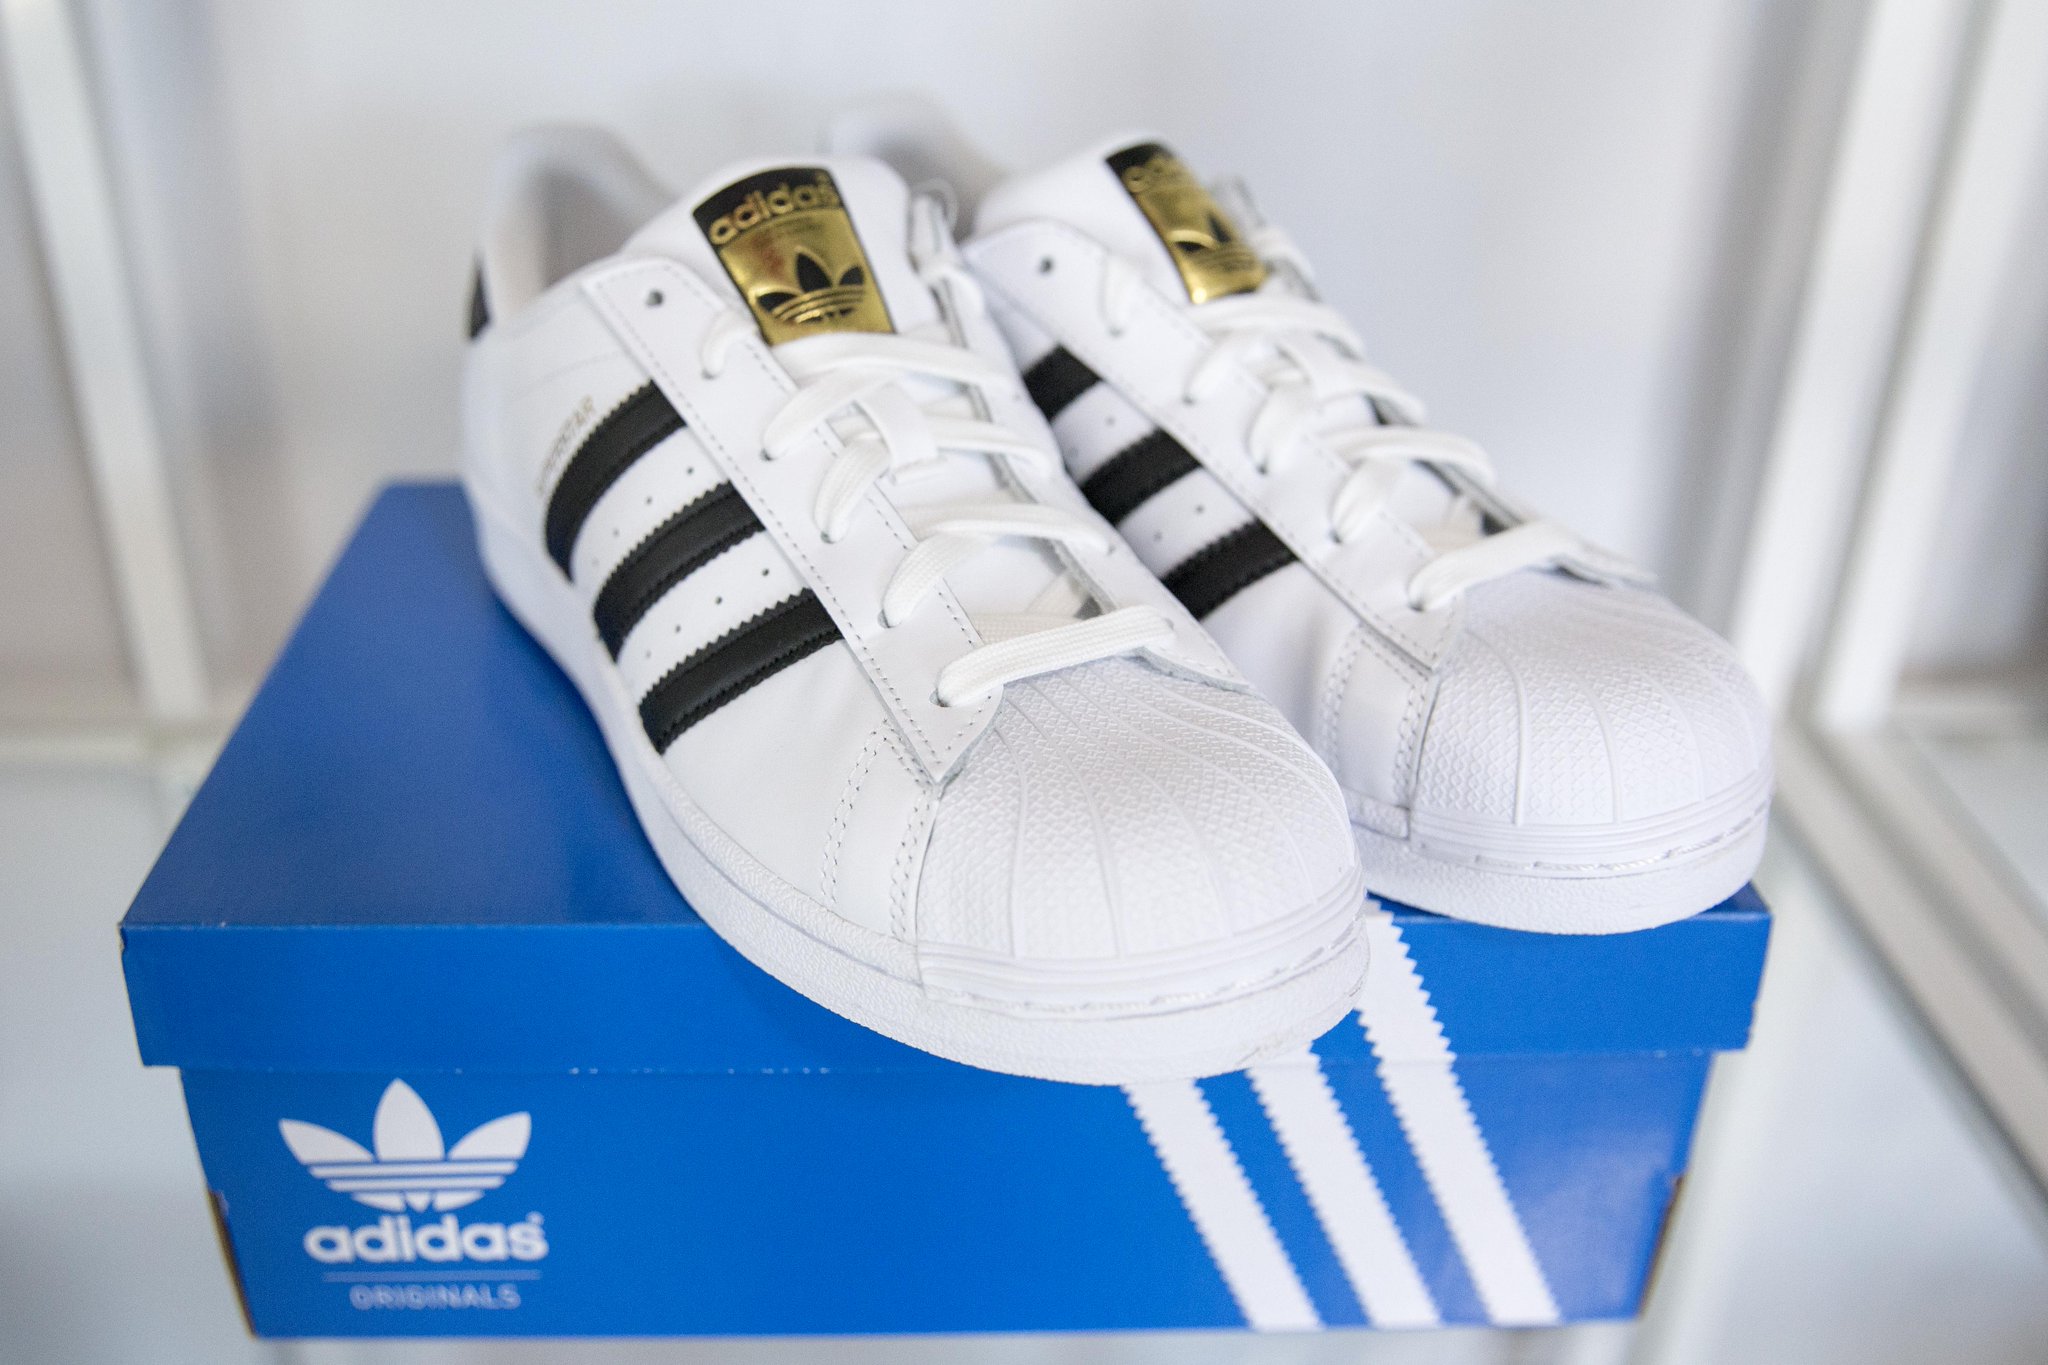 adidas outlet dixie mall online -